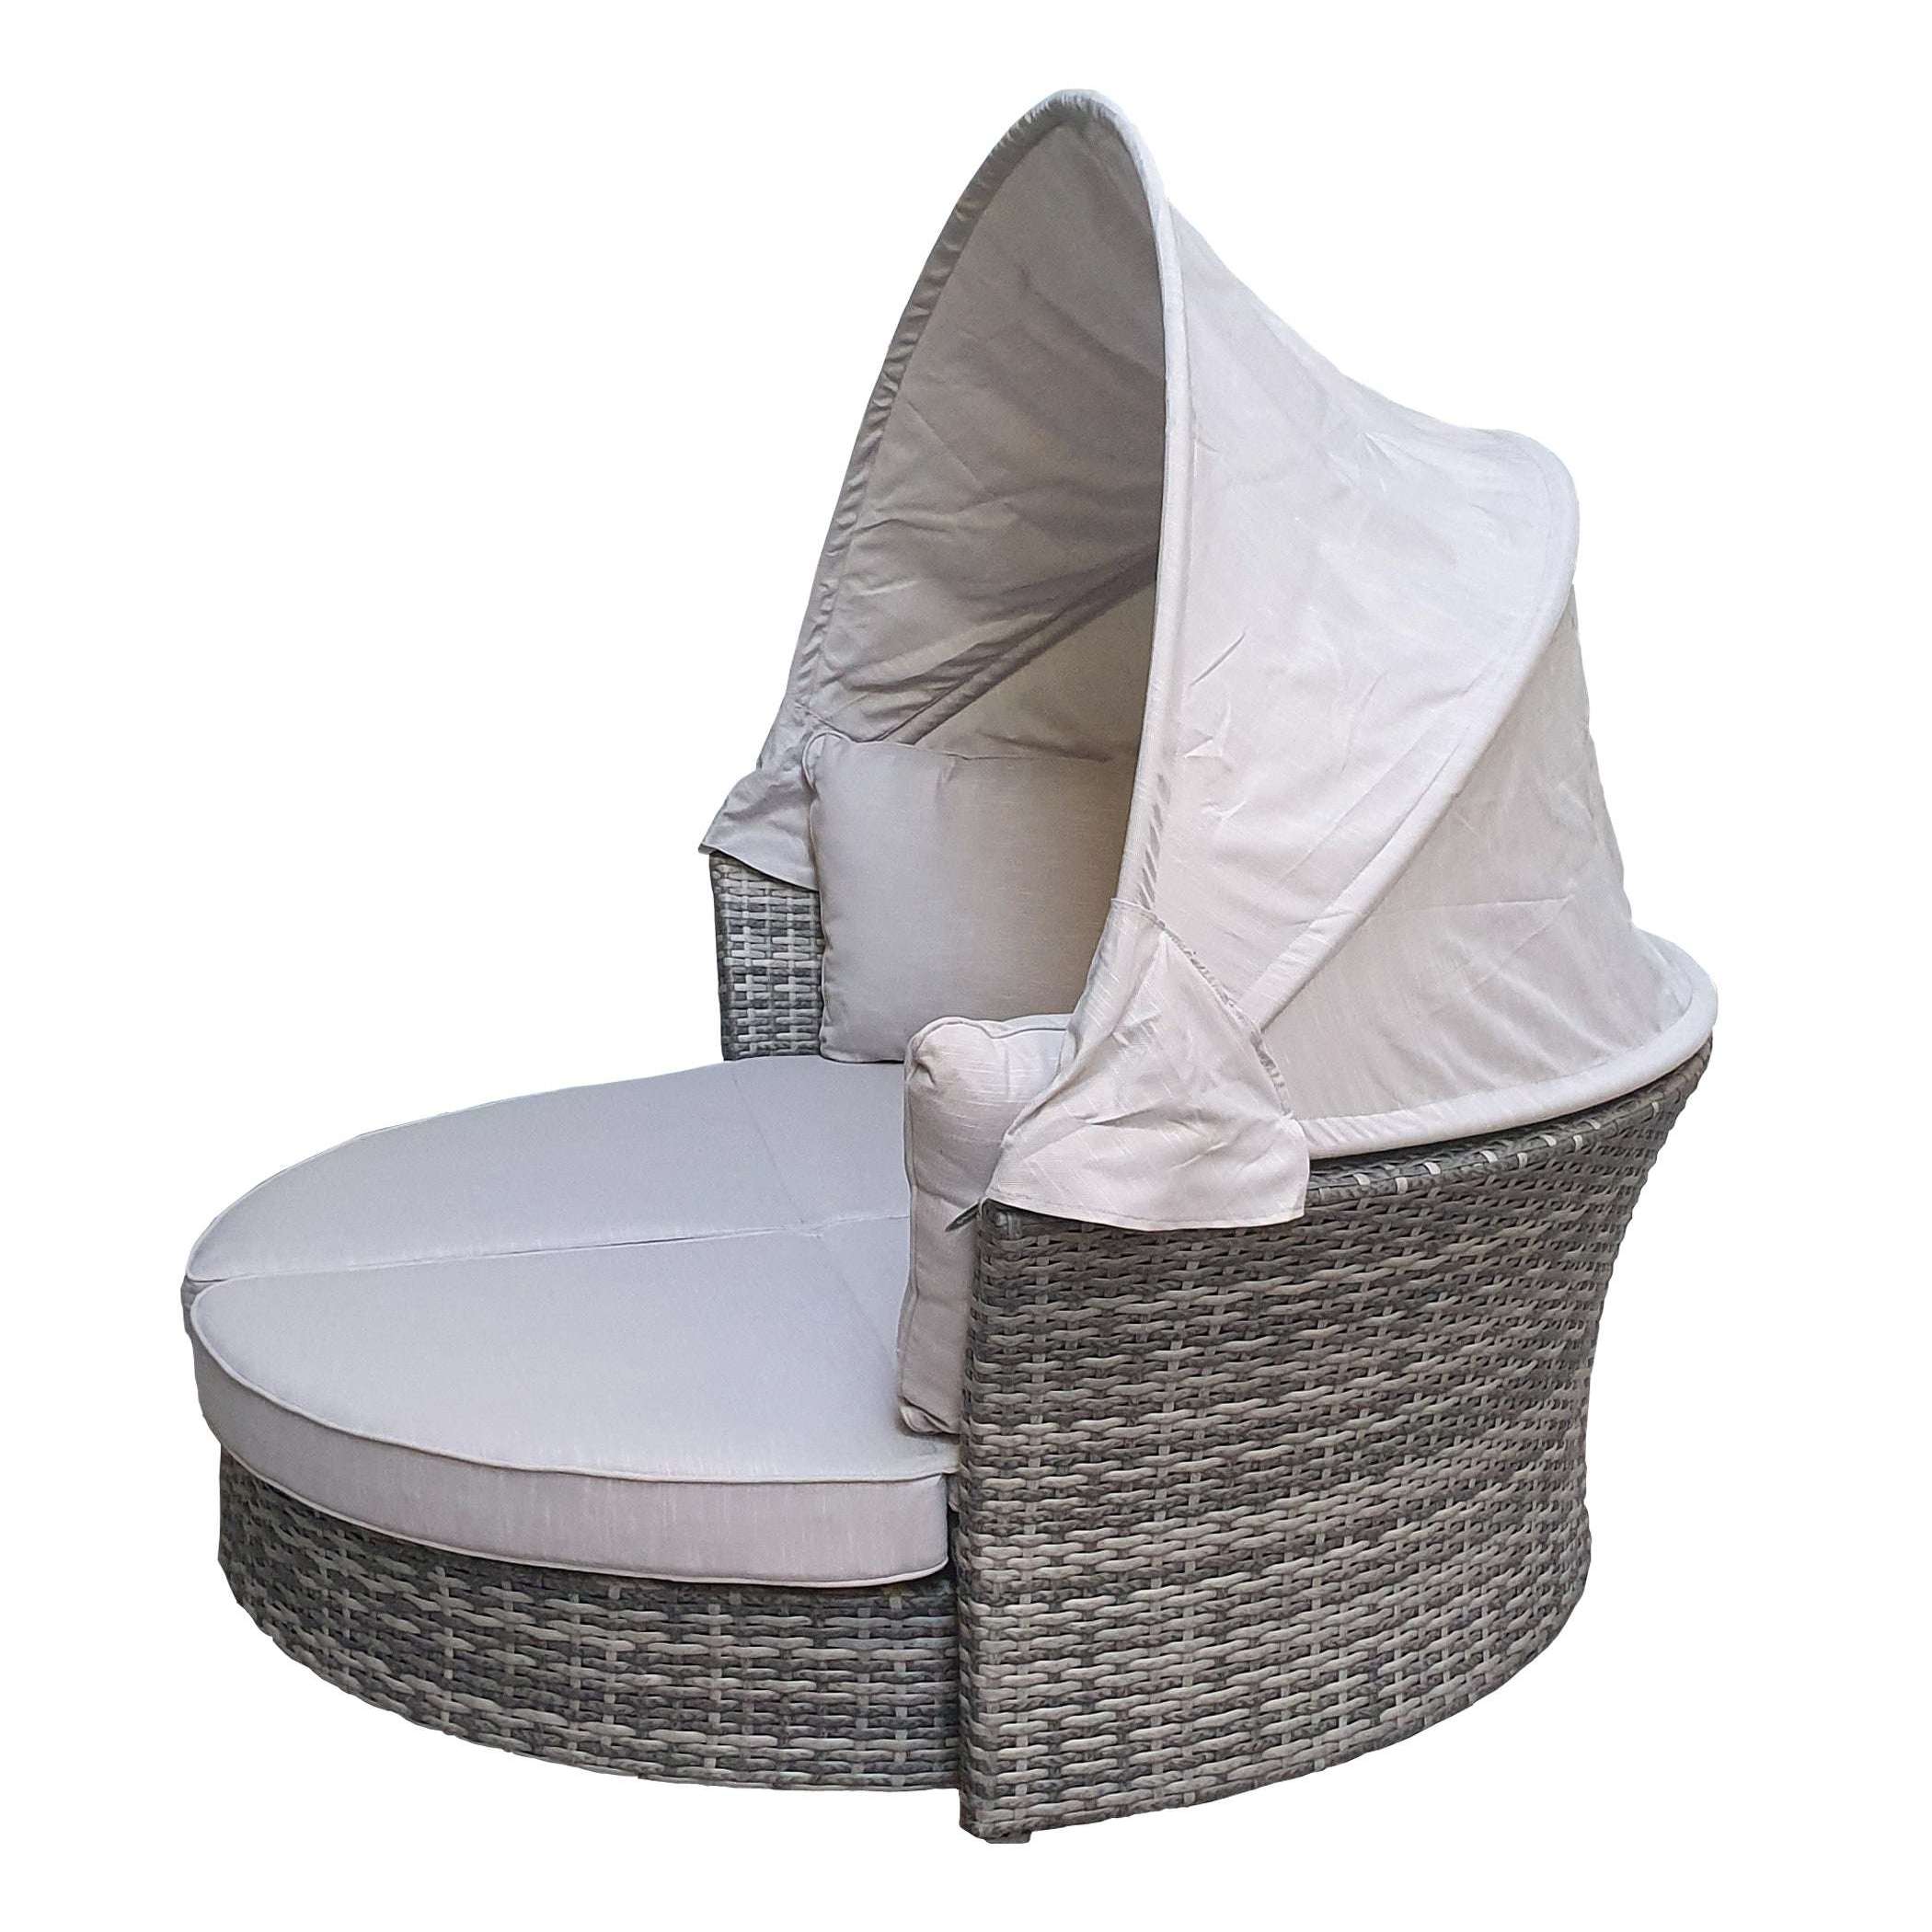 Exceptional Garden:Signature Weave Lilly Daybed - Grey